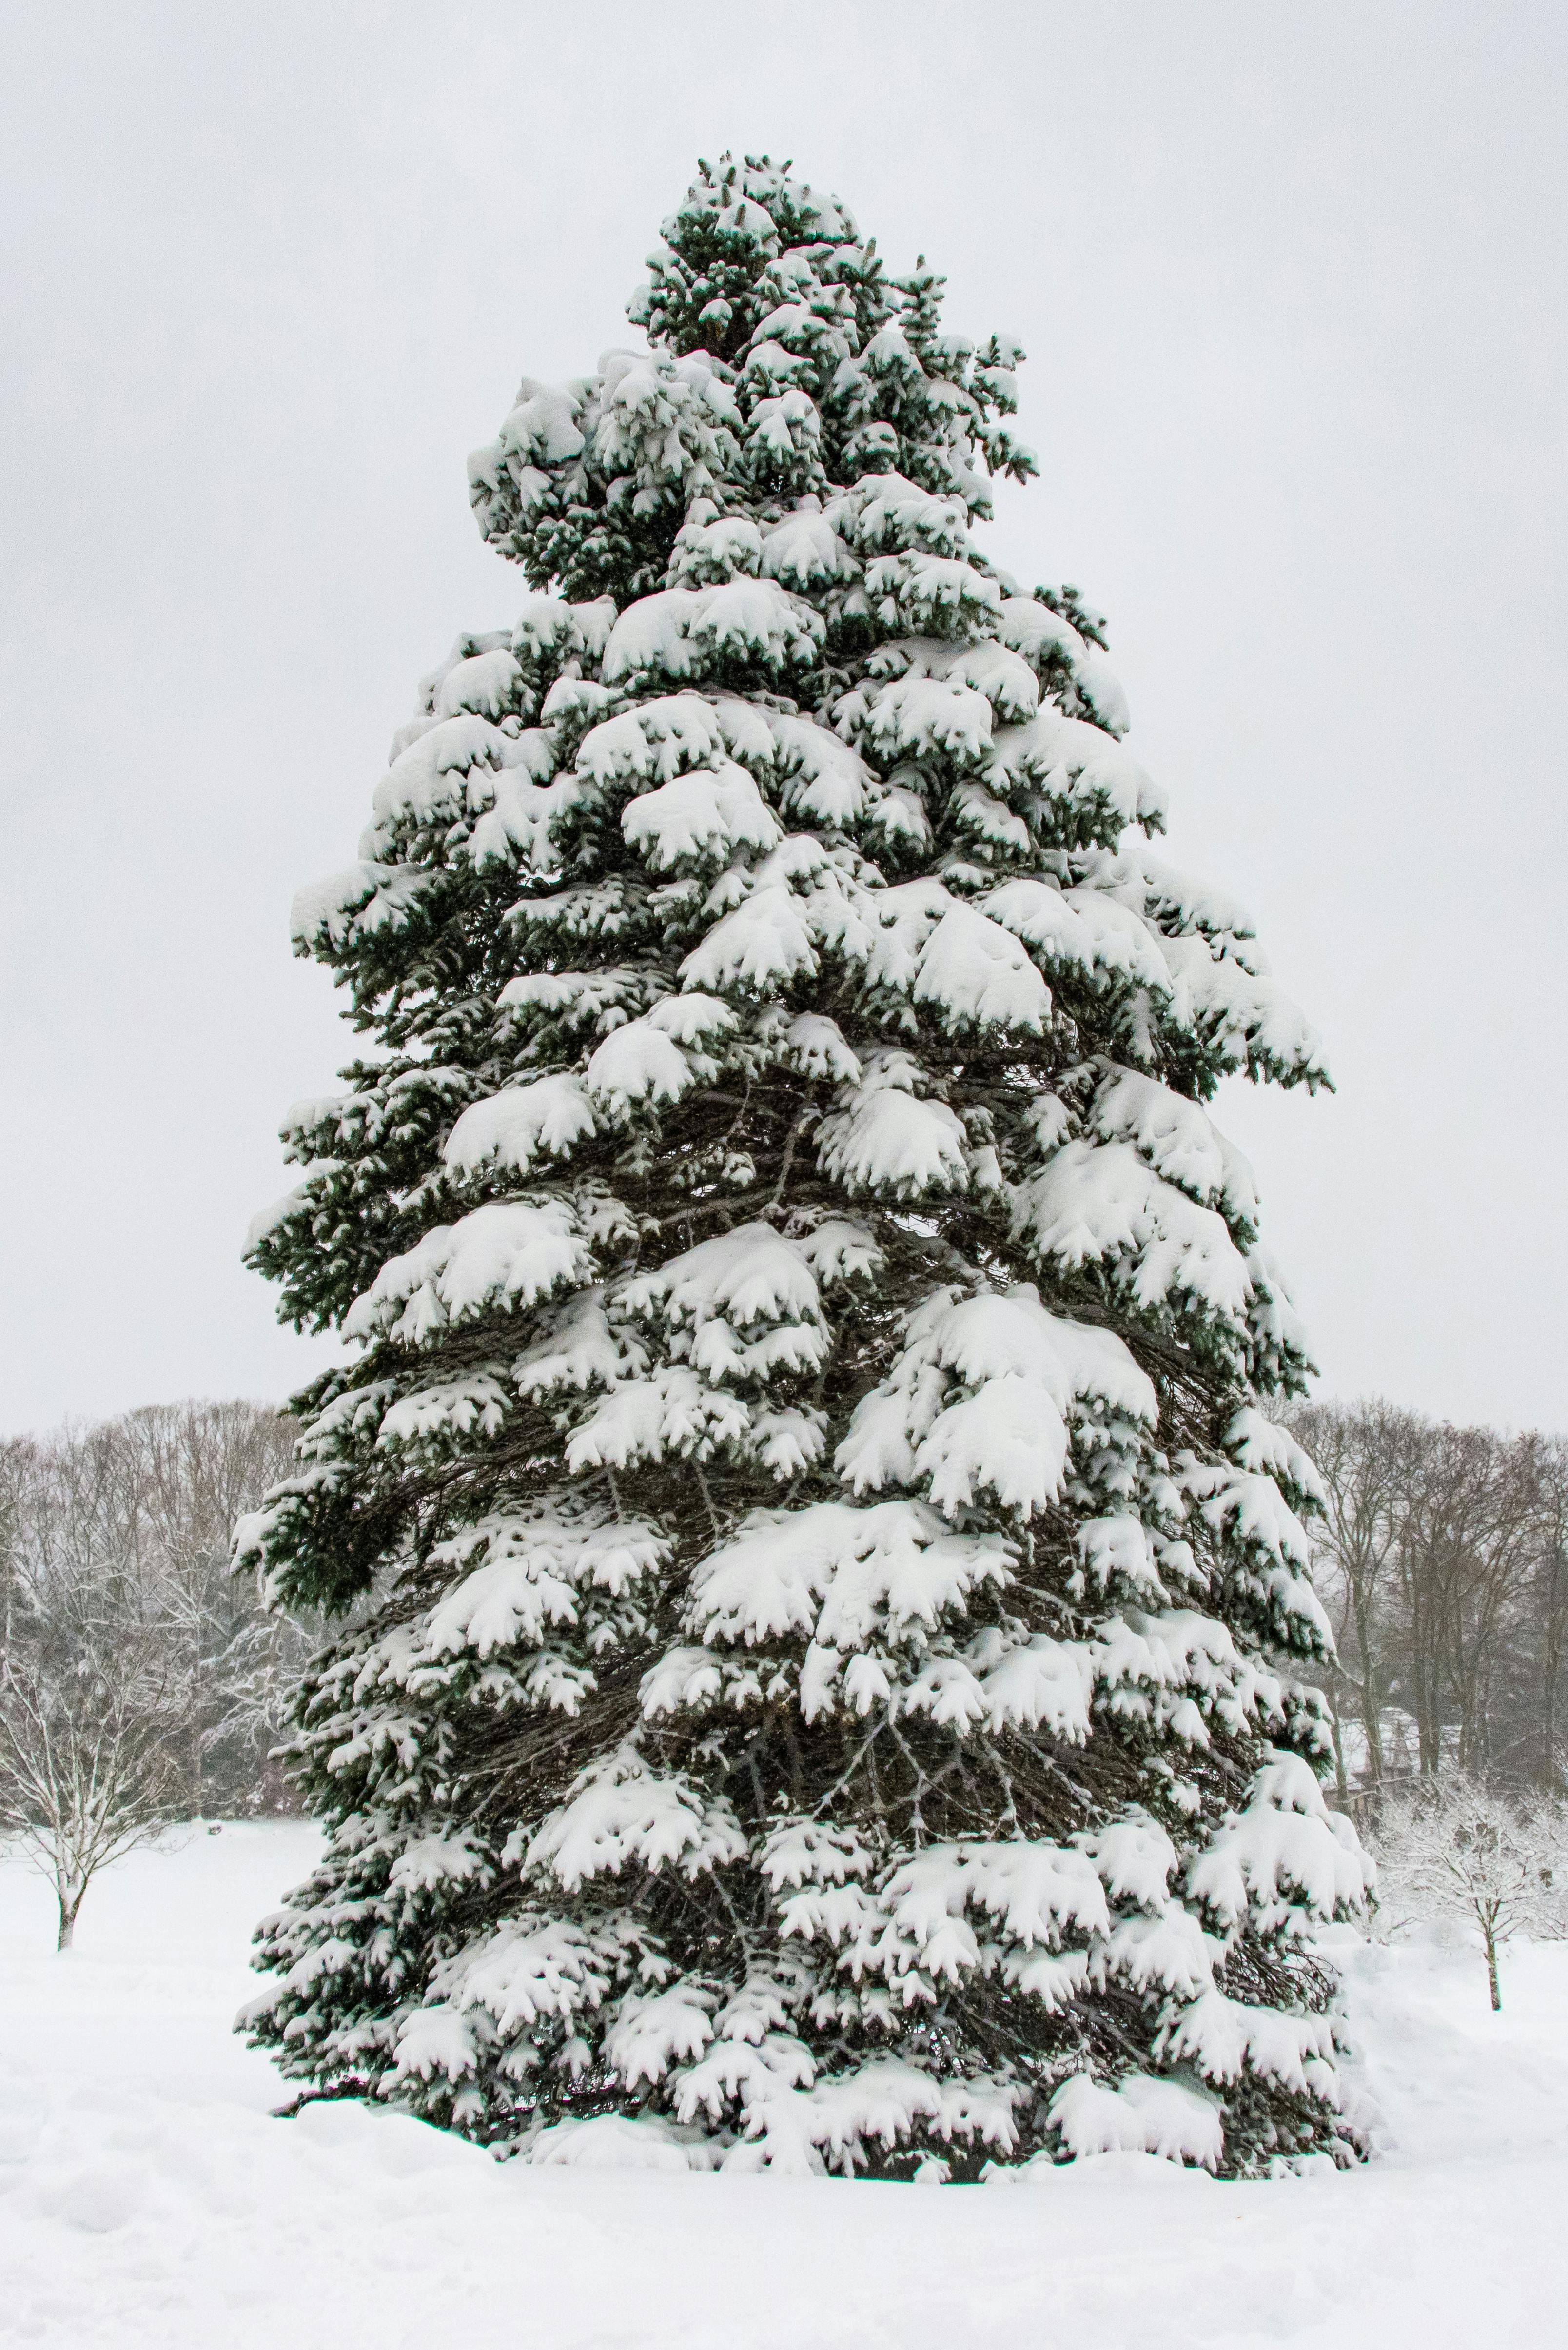 Image of Pine tree covered in snow free to use